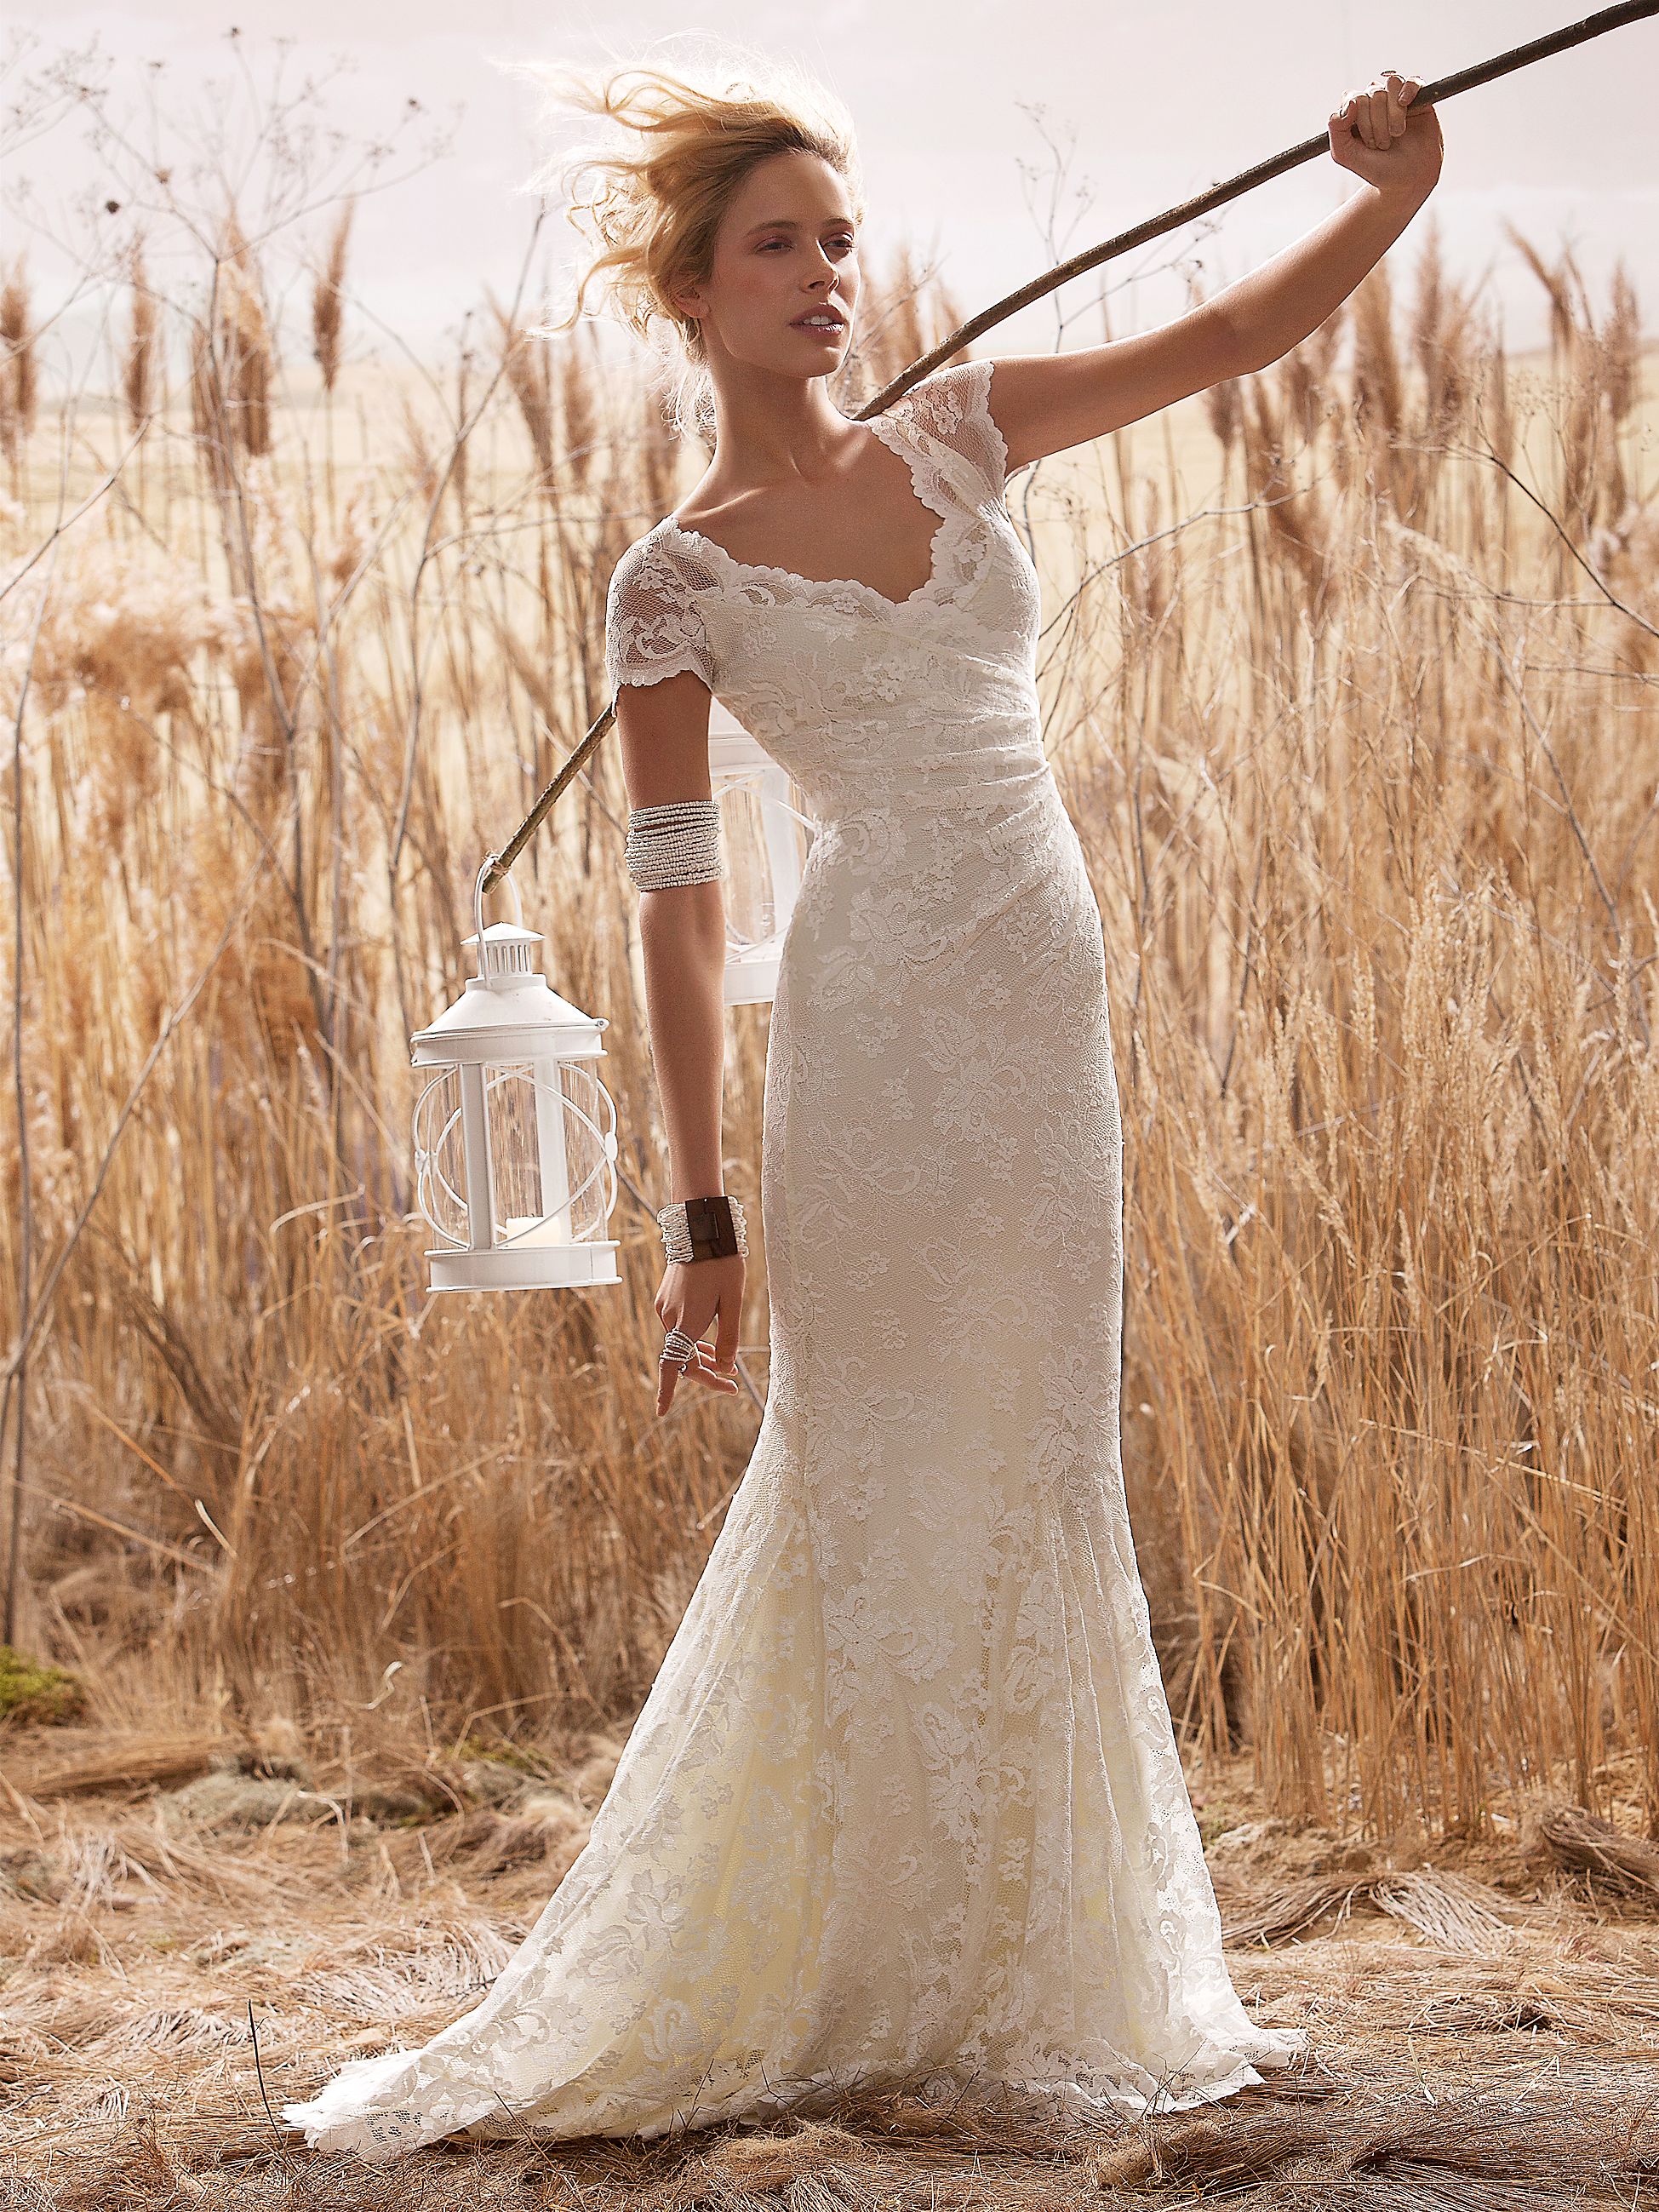  Wedding  Gowns  From Olvi s Rustic  Wedding  Chic